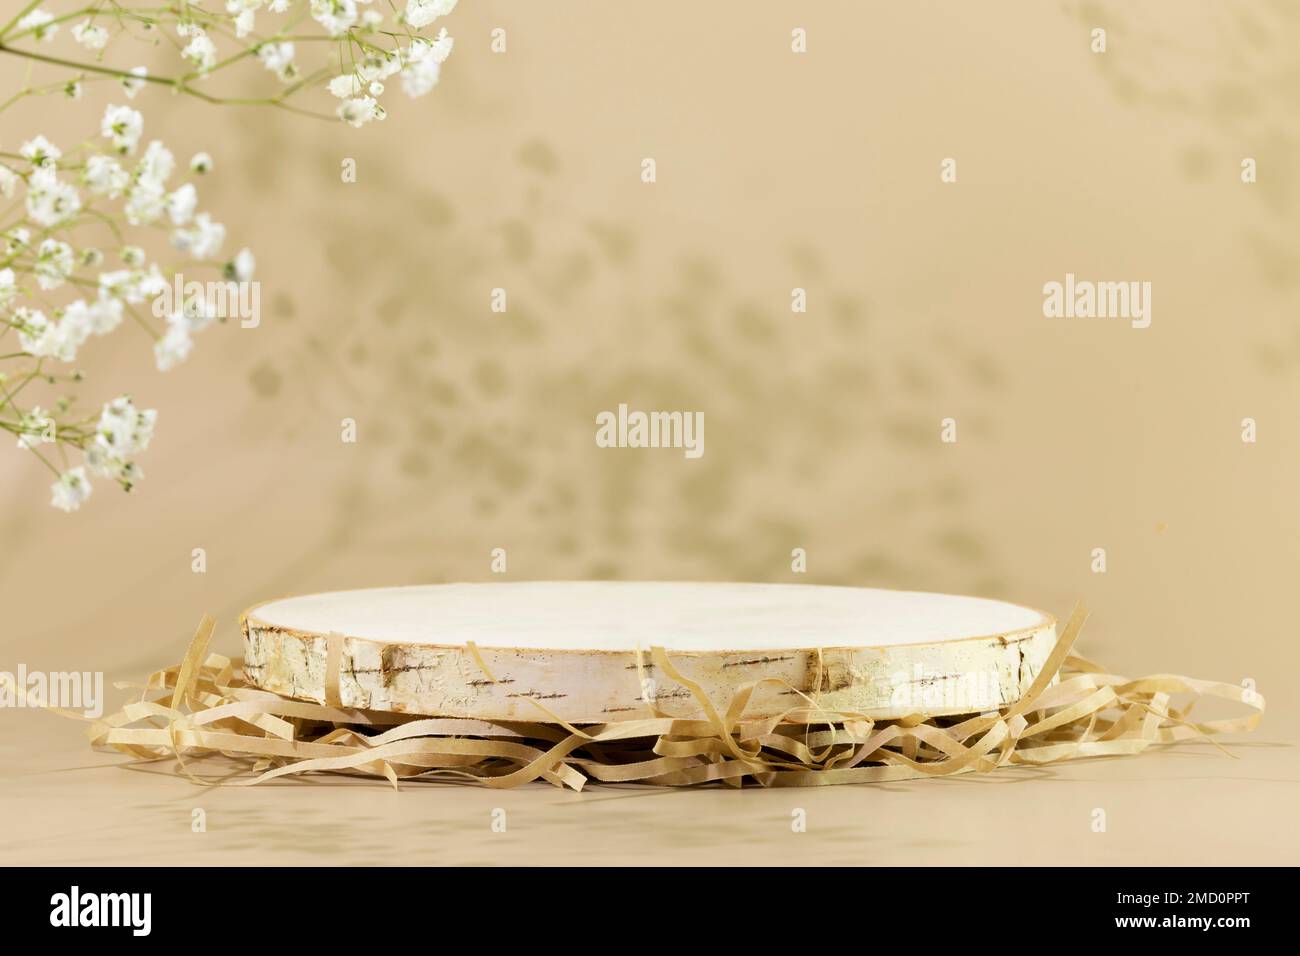 Wooden empty podium on natural beige background with white flowers and shadows. Round show case for natural cosmetic products. Concept scene stage for Stock Photo